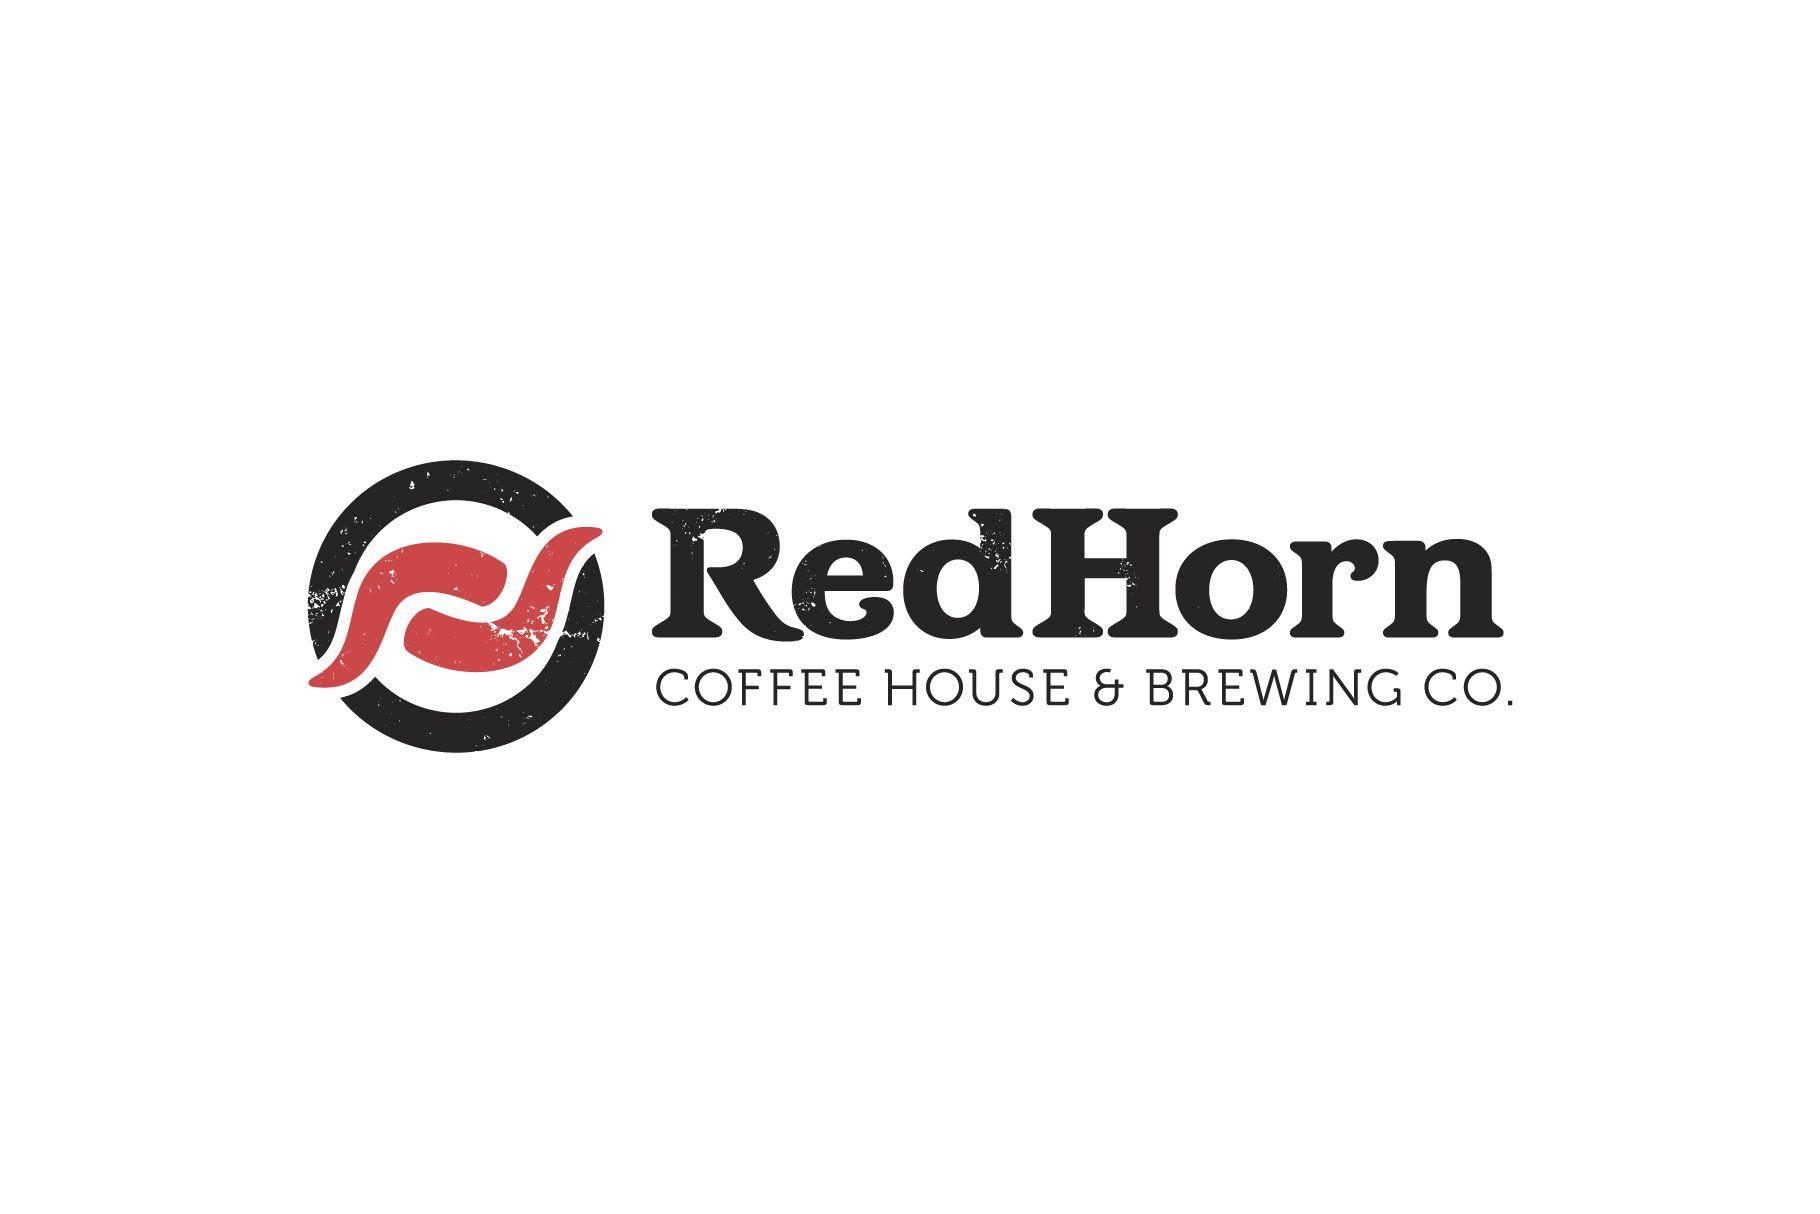 Red Horn Logo - Red Horn Coffee House & Brewing Co. Design Branding